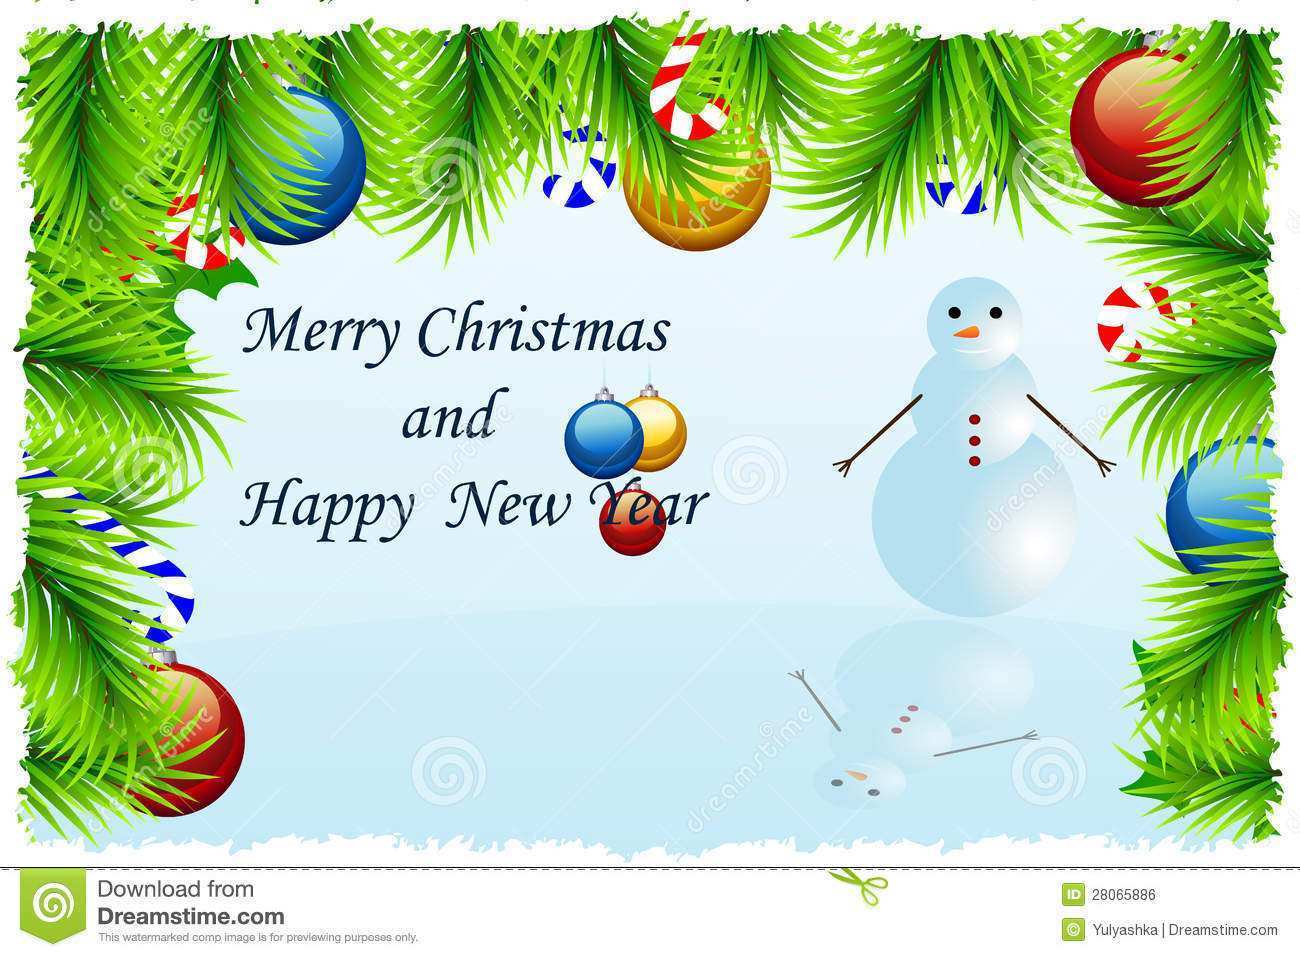 51 Format Snowman Card Template Free Photo with Snowman Card Template Free